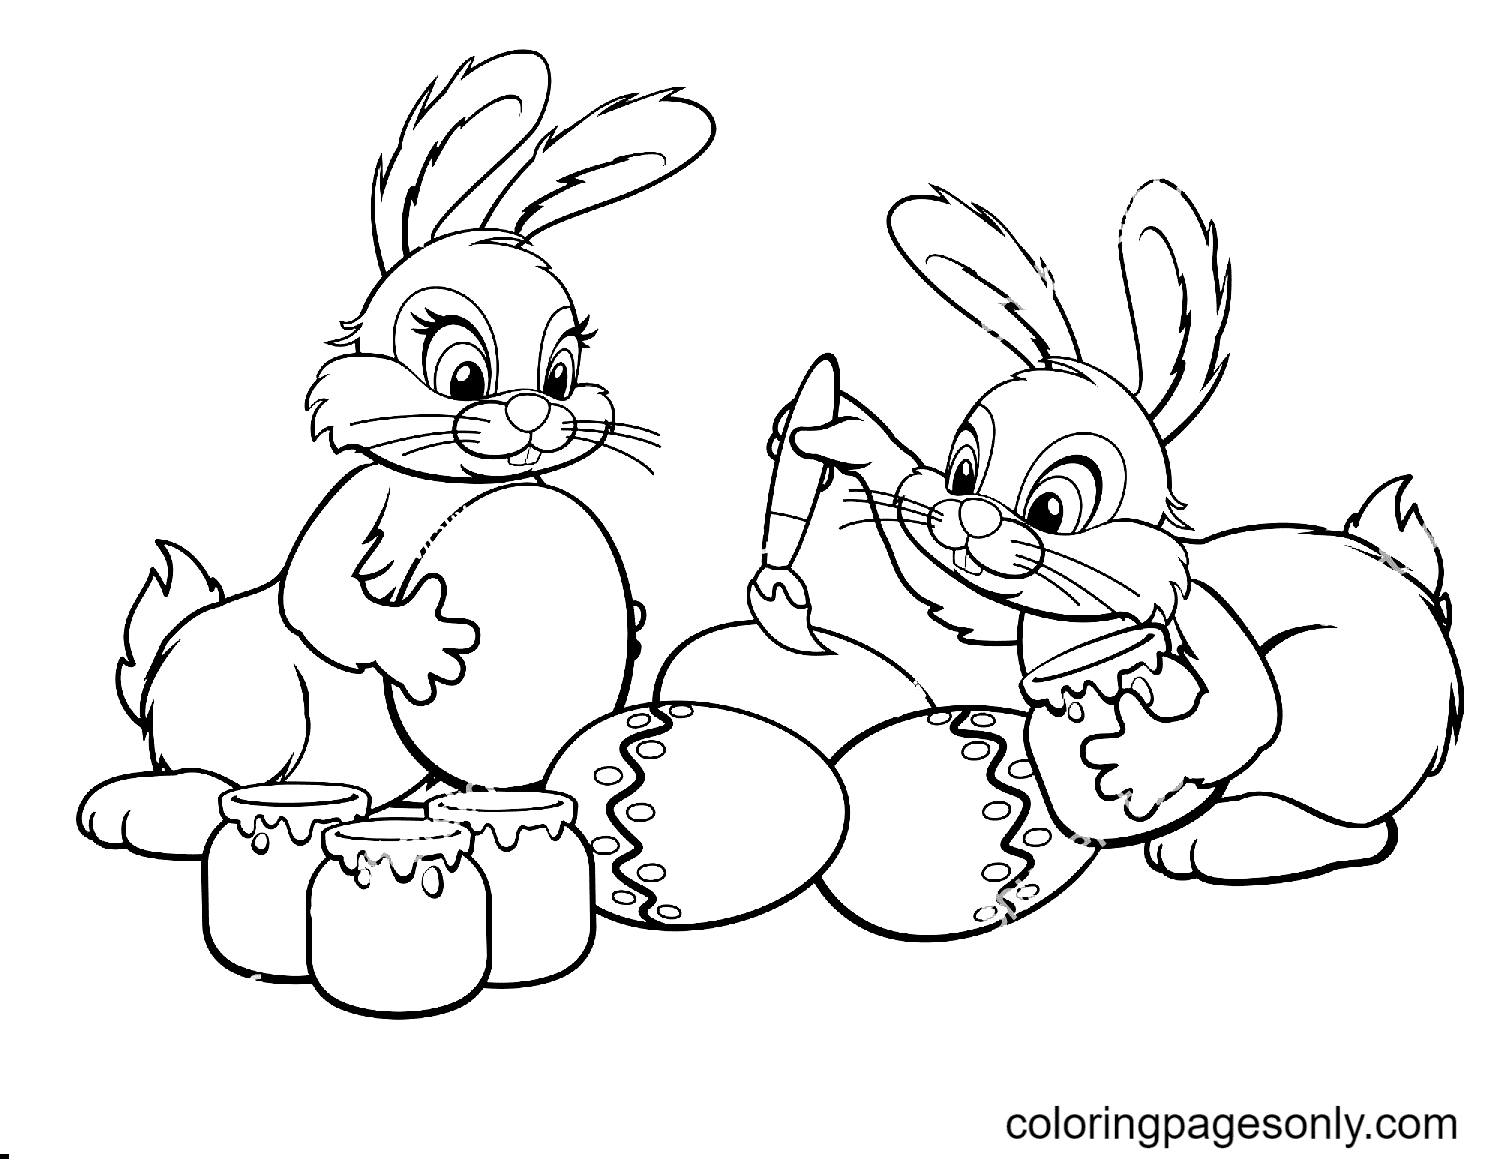 Two Easter Bunnies Draw Eggs Coloring Page Free Printable Coloring Pages